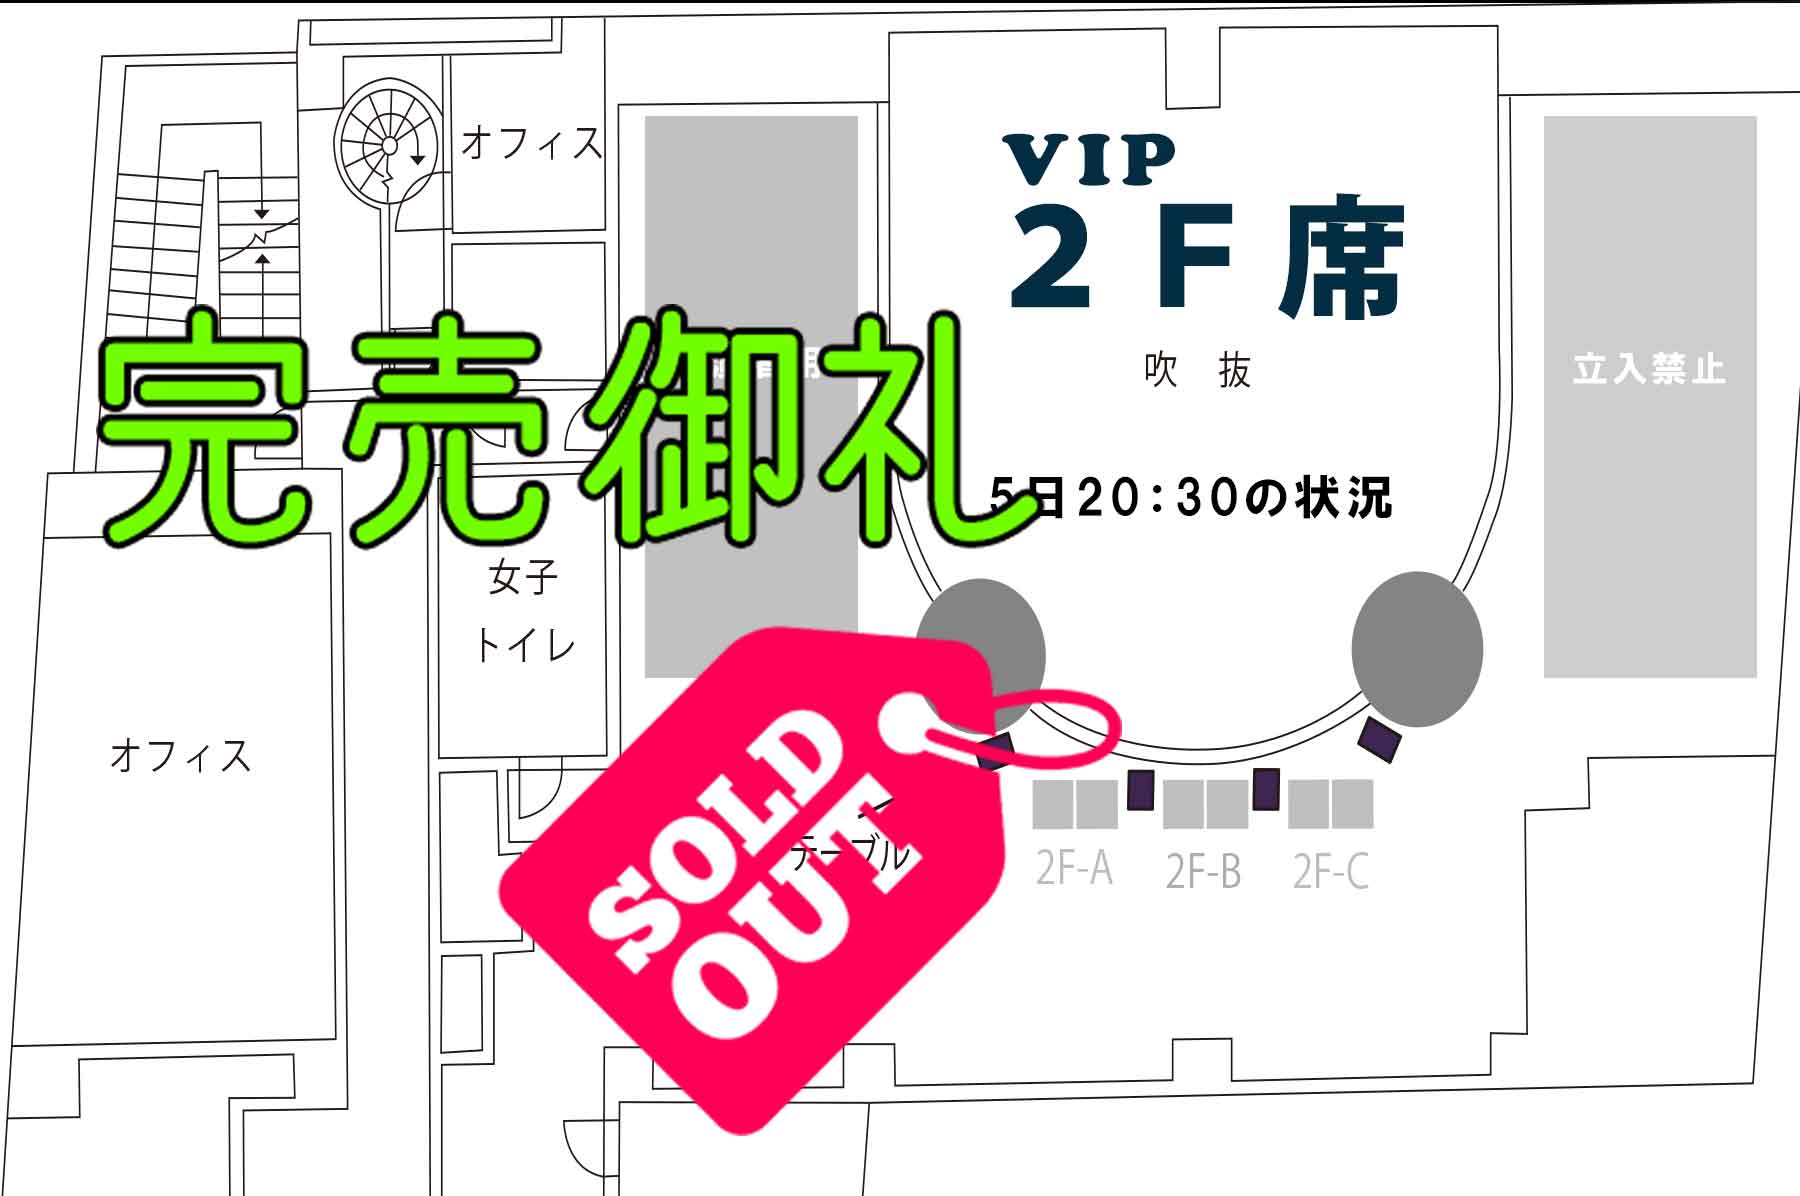 sold-out-for-2nd-floor-ticket-7th-evet